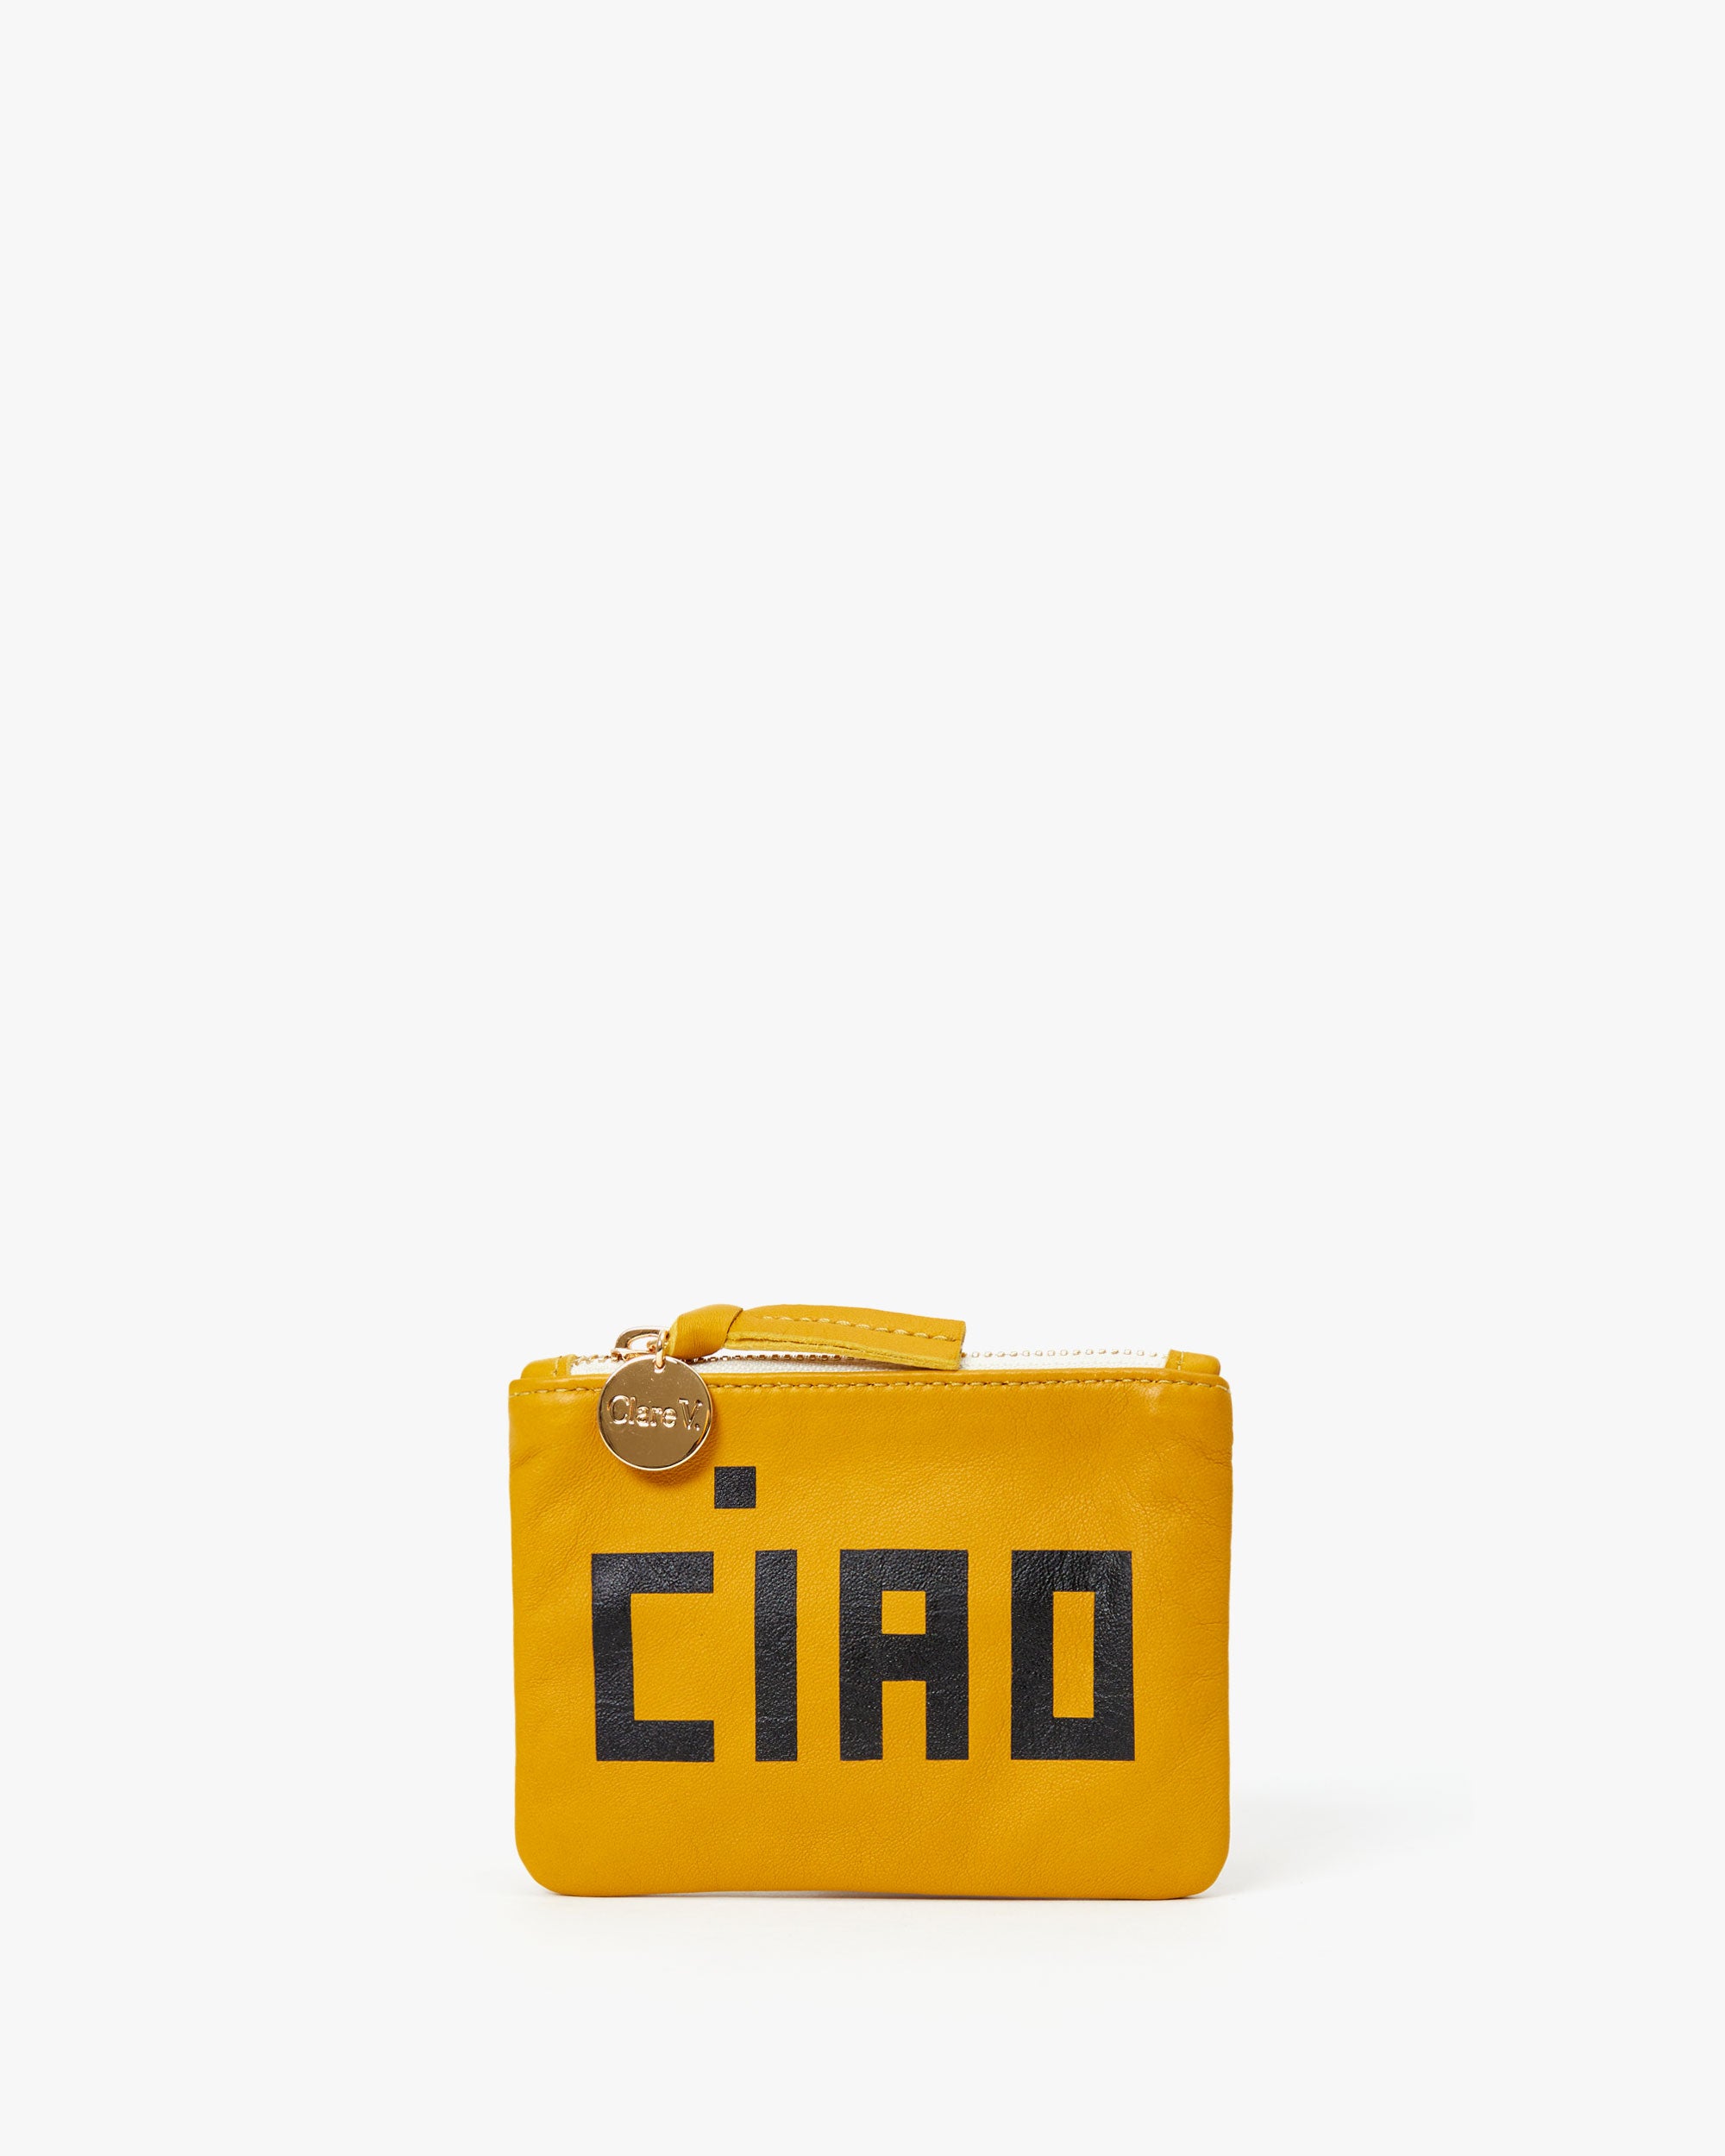 Clare V, Bags, Clare V Coin Clutch